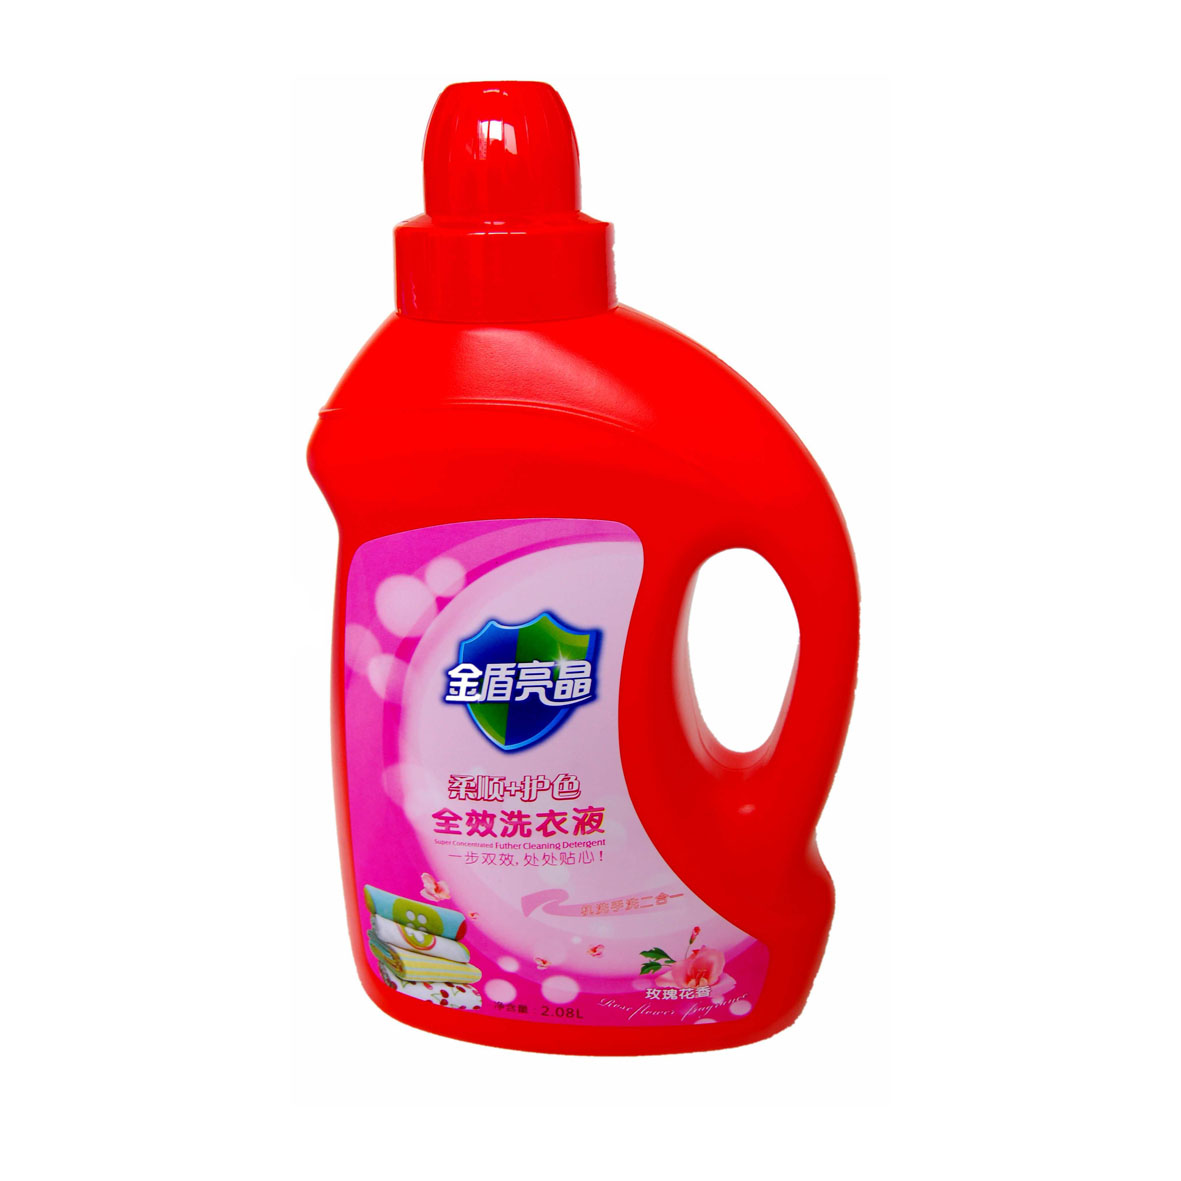 Golden Shield Bright Crystal Laundry Liquid 2.08L. Red Bottle (Full Effect / Supple + Color Protection)